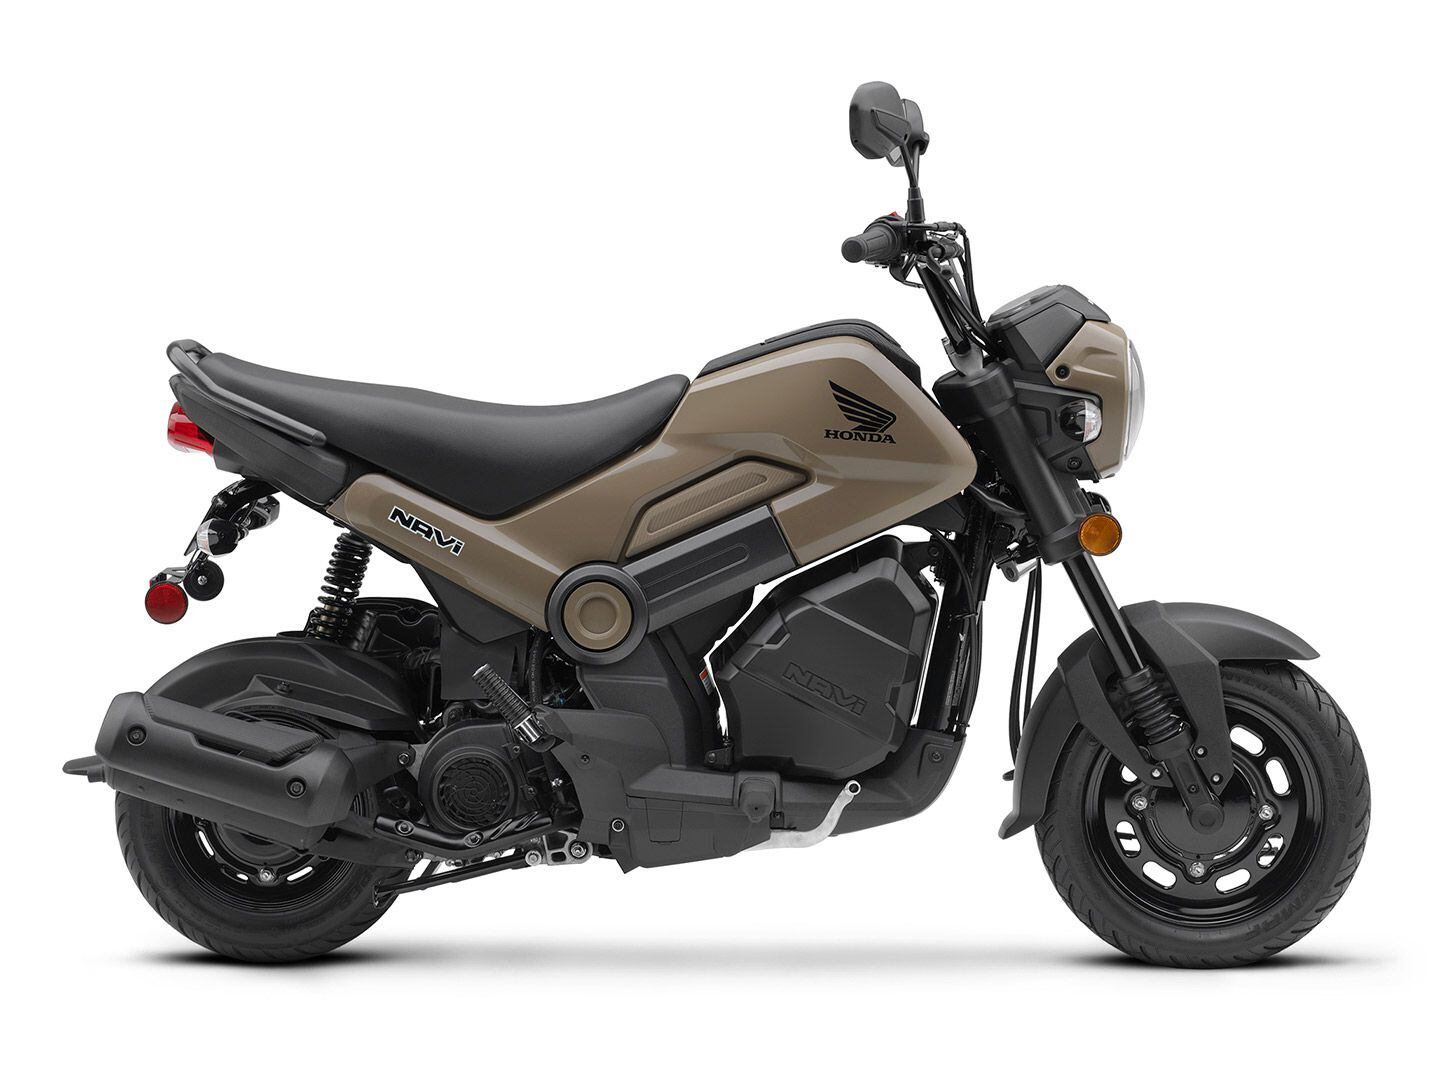 The Navi ($1,807) is Honda’s lowest-priced miniMOTO. It is only just above the CRF50F ($1,699), but has the capability of being a daily rider on the street.